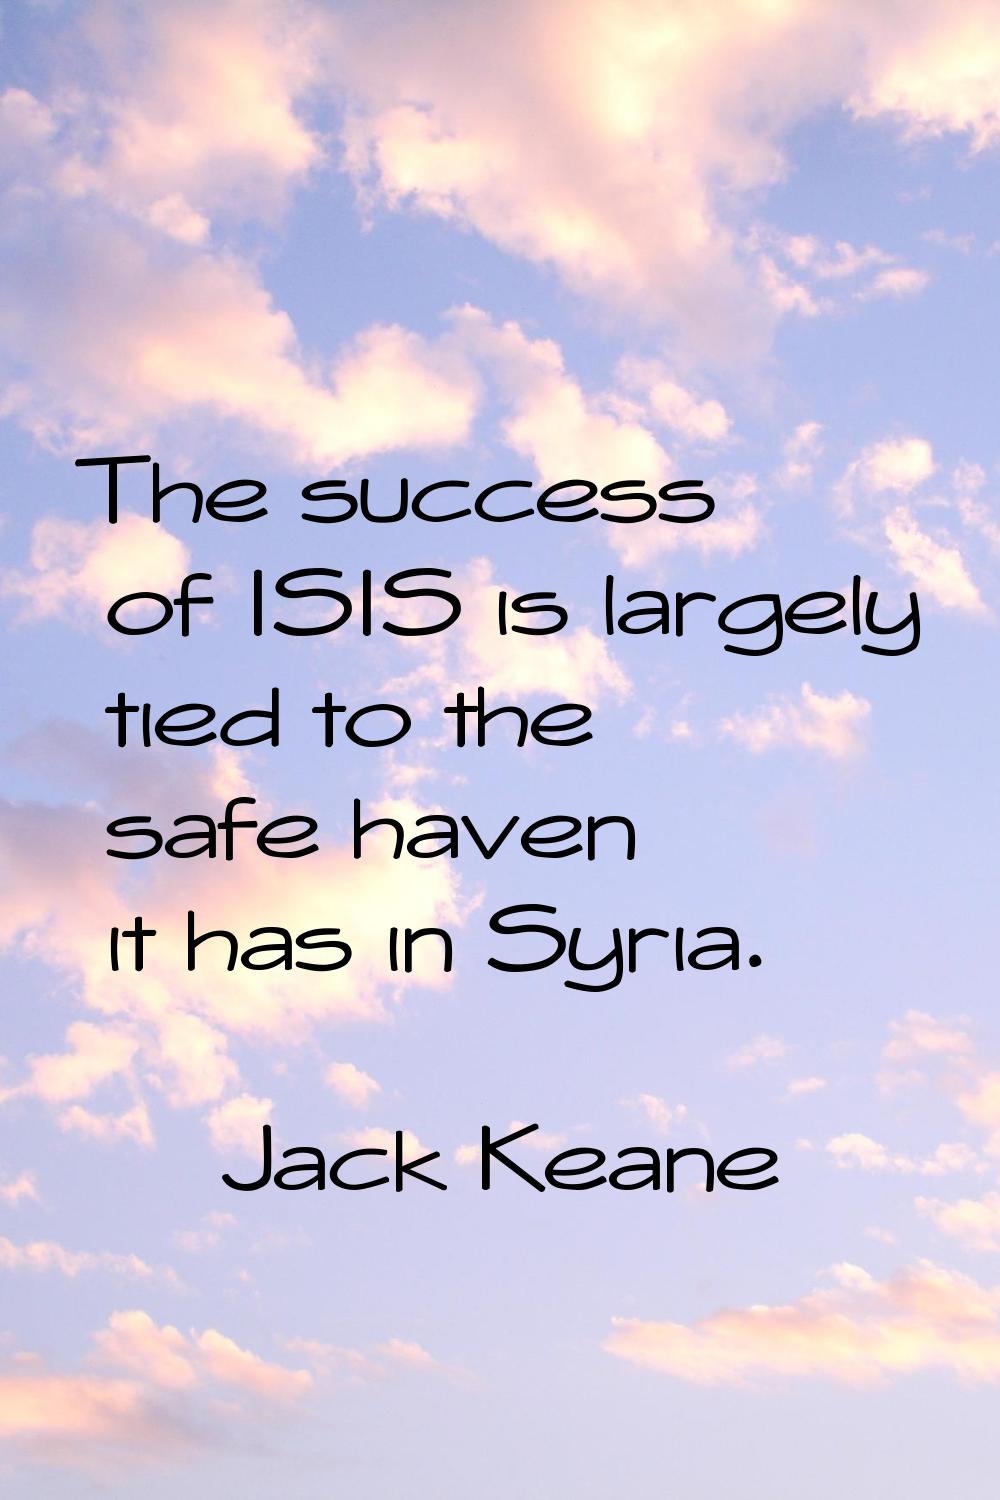 The success of ISIS is largely tied to the safe haven it has in Syria.